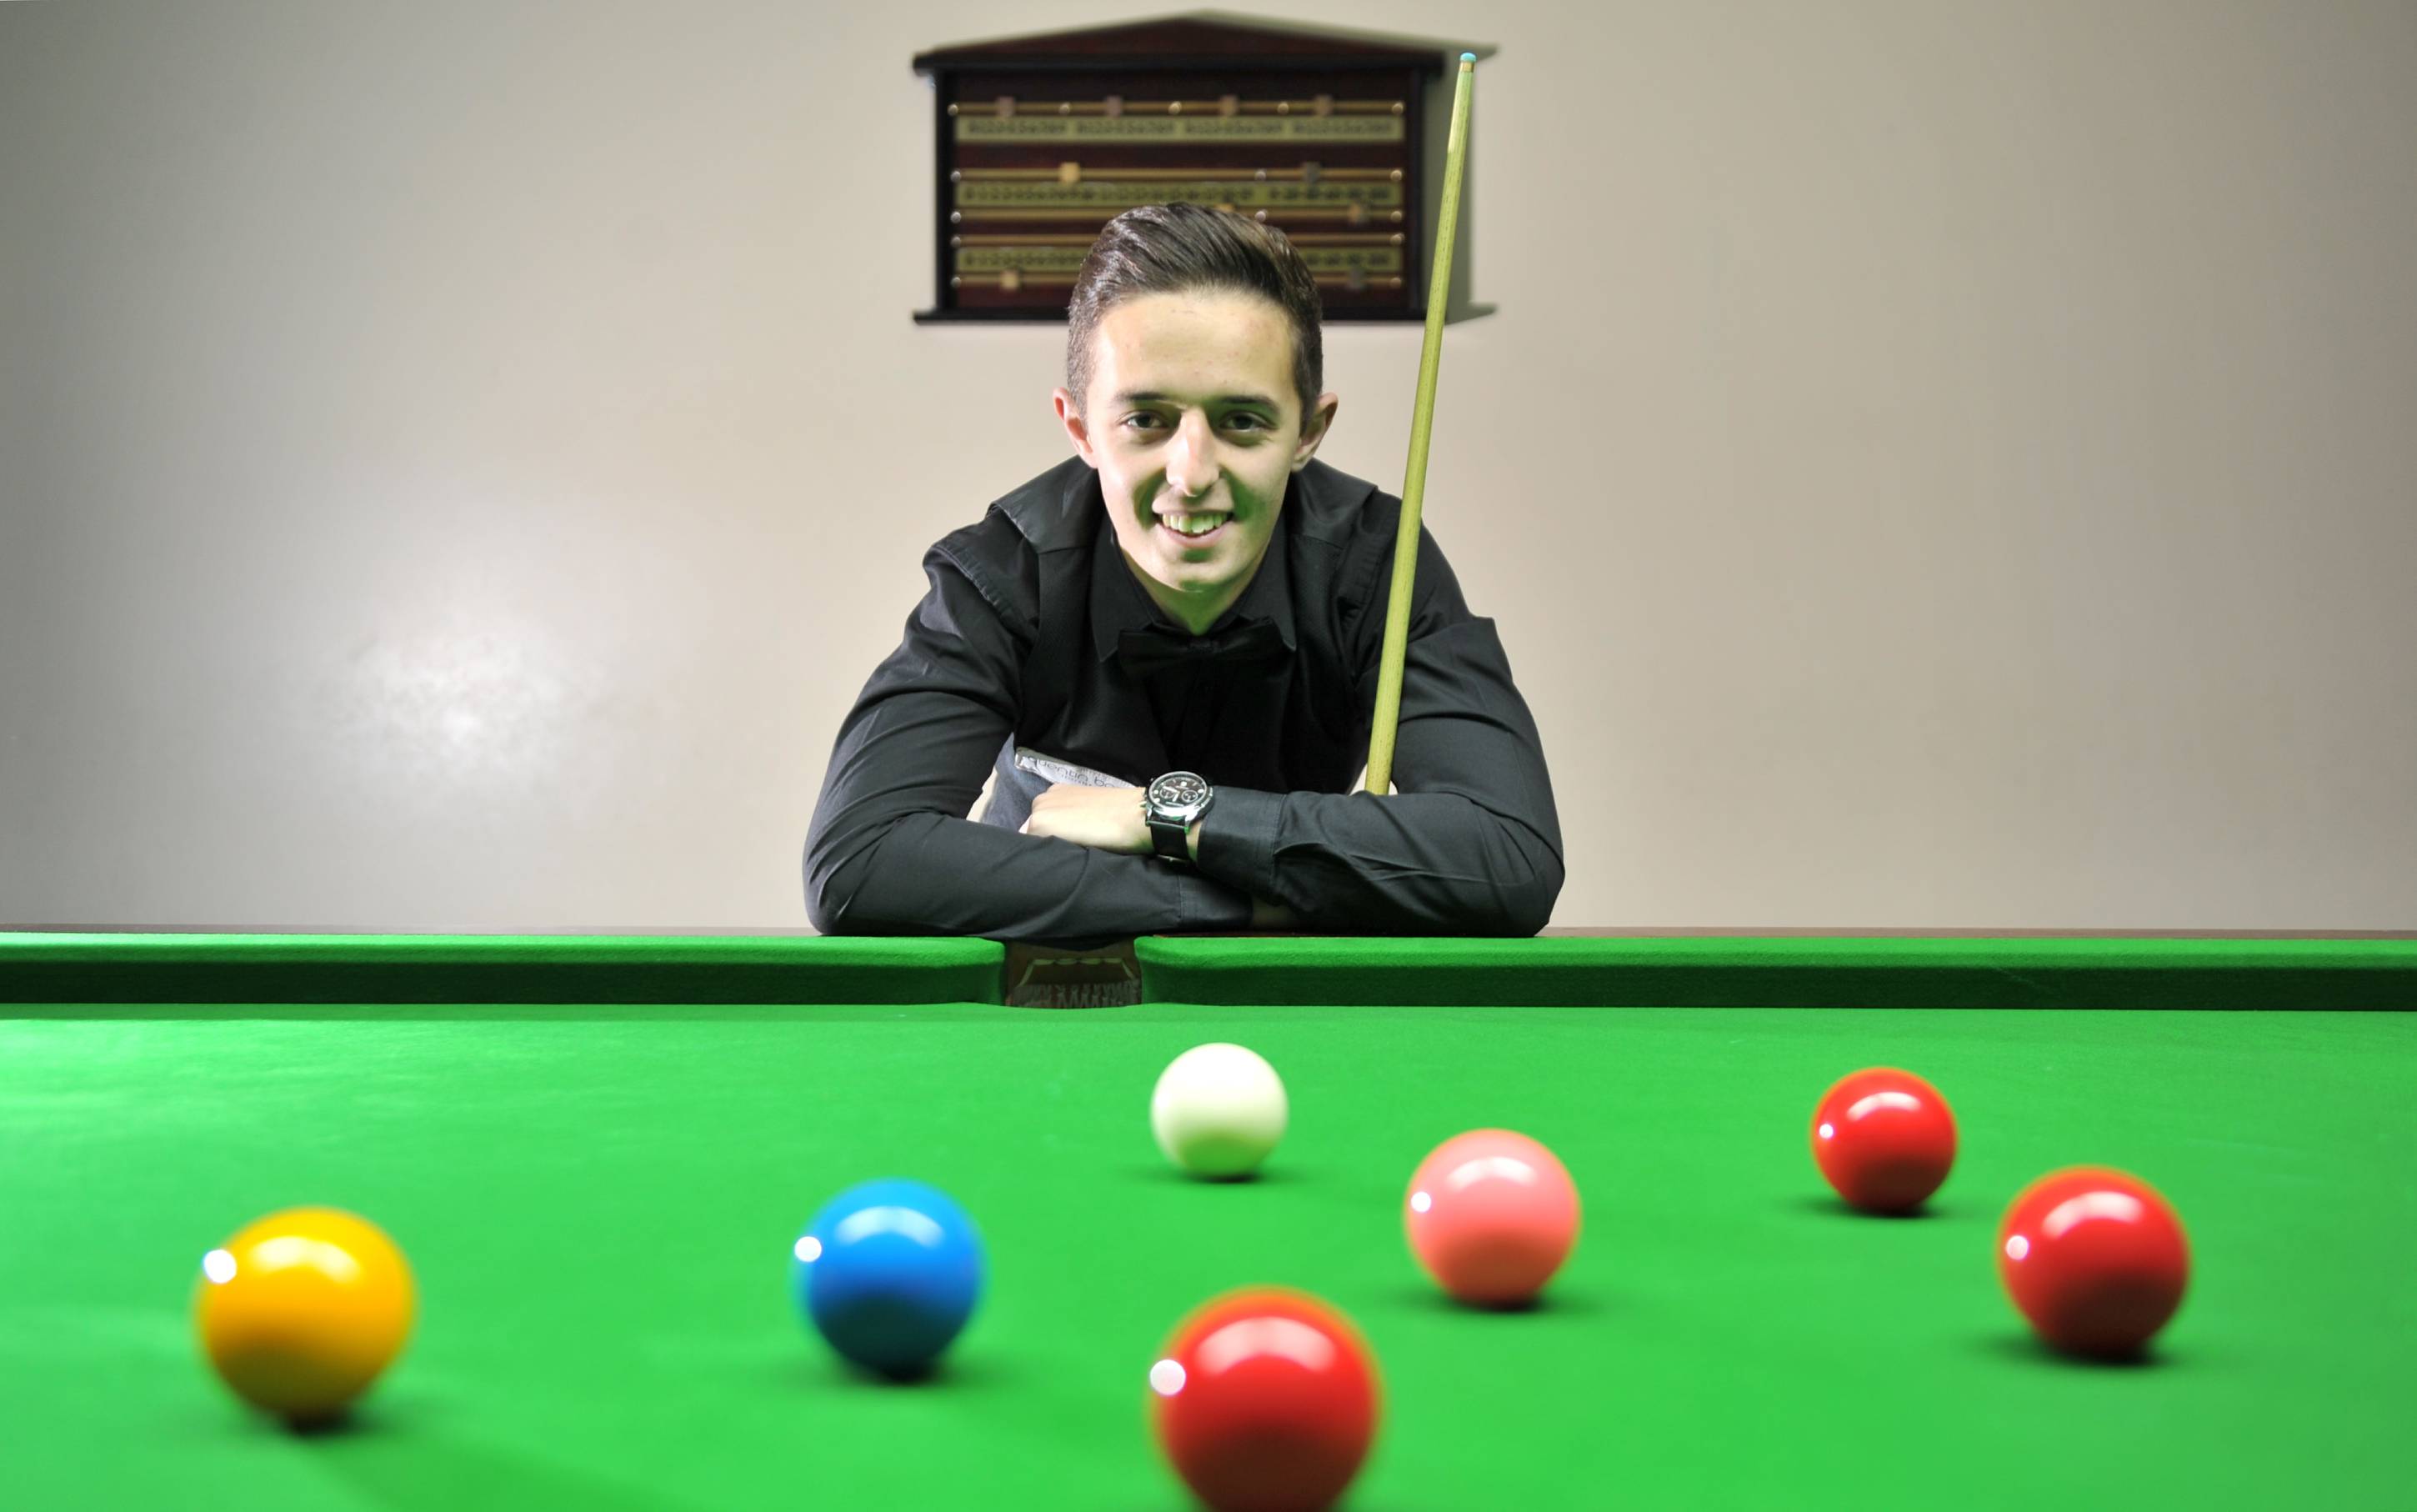 Young snooker professional Joe OConnor looking long-term ahead of the UK Championship